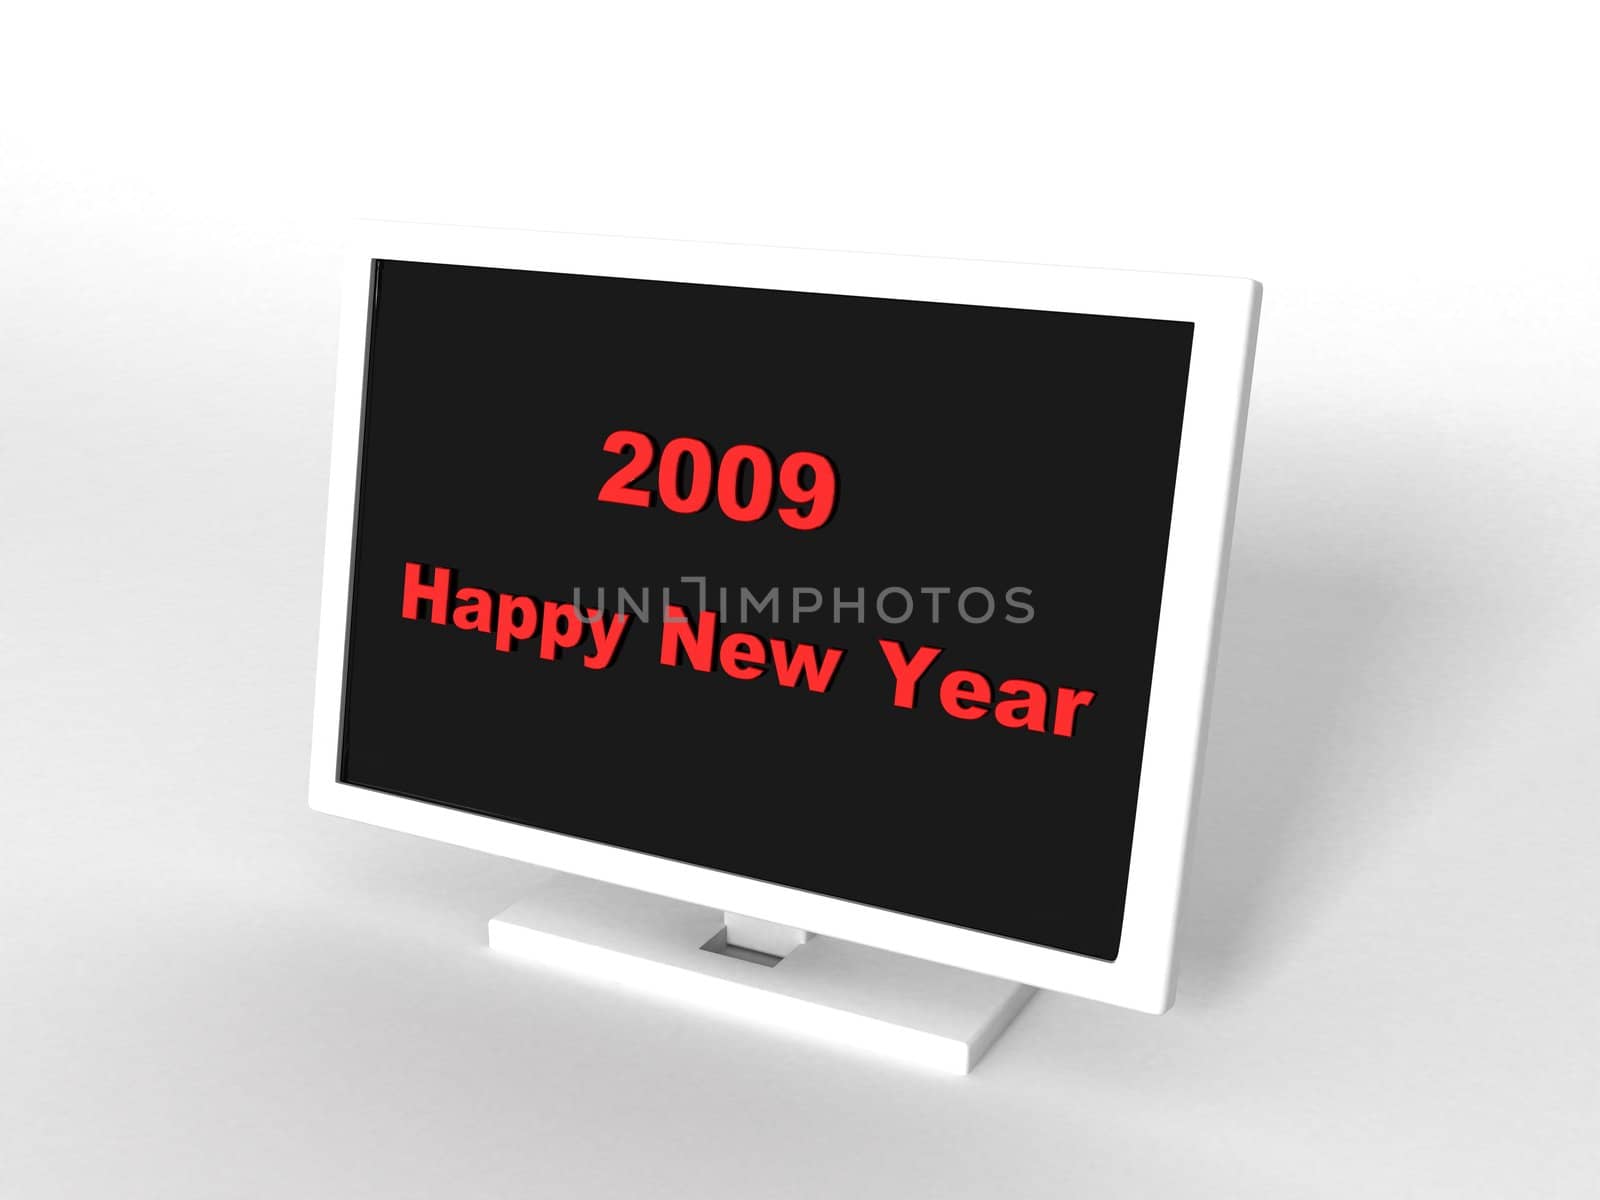 monitor showing happy new year by imagerymajestic